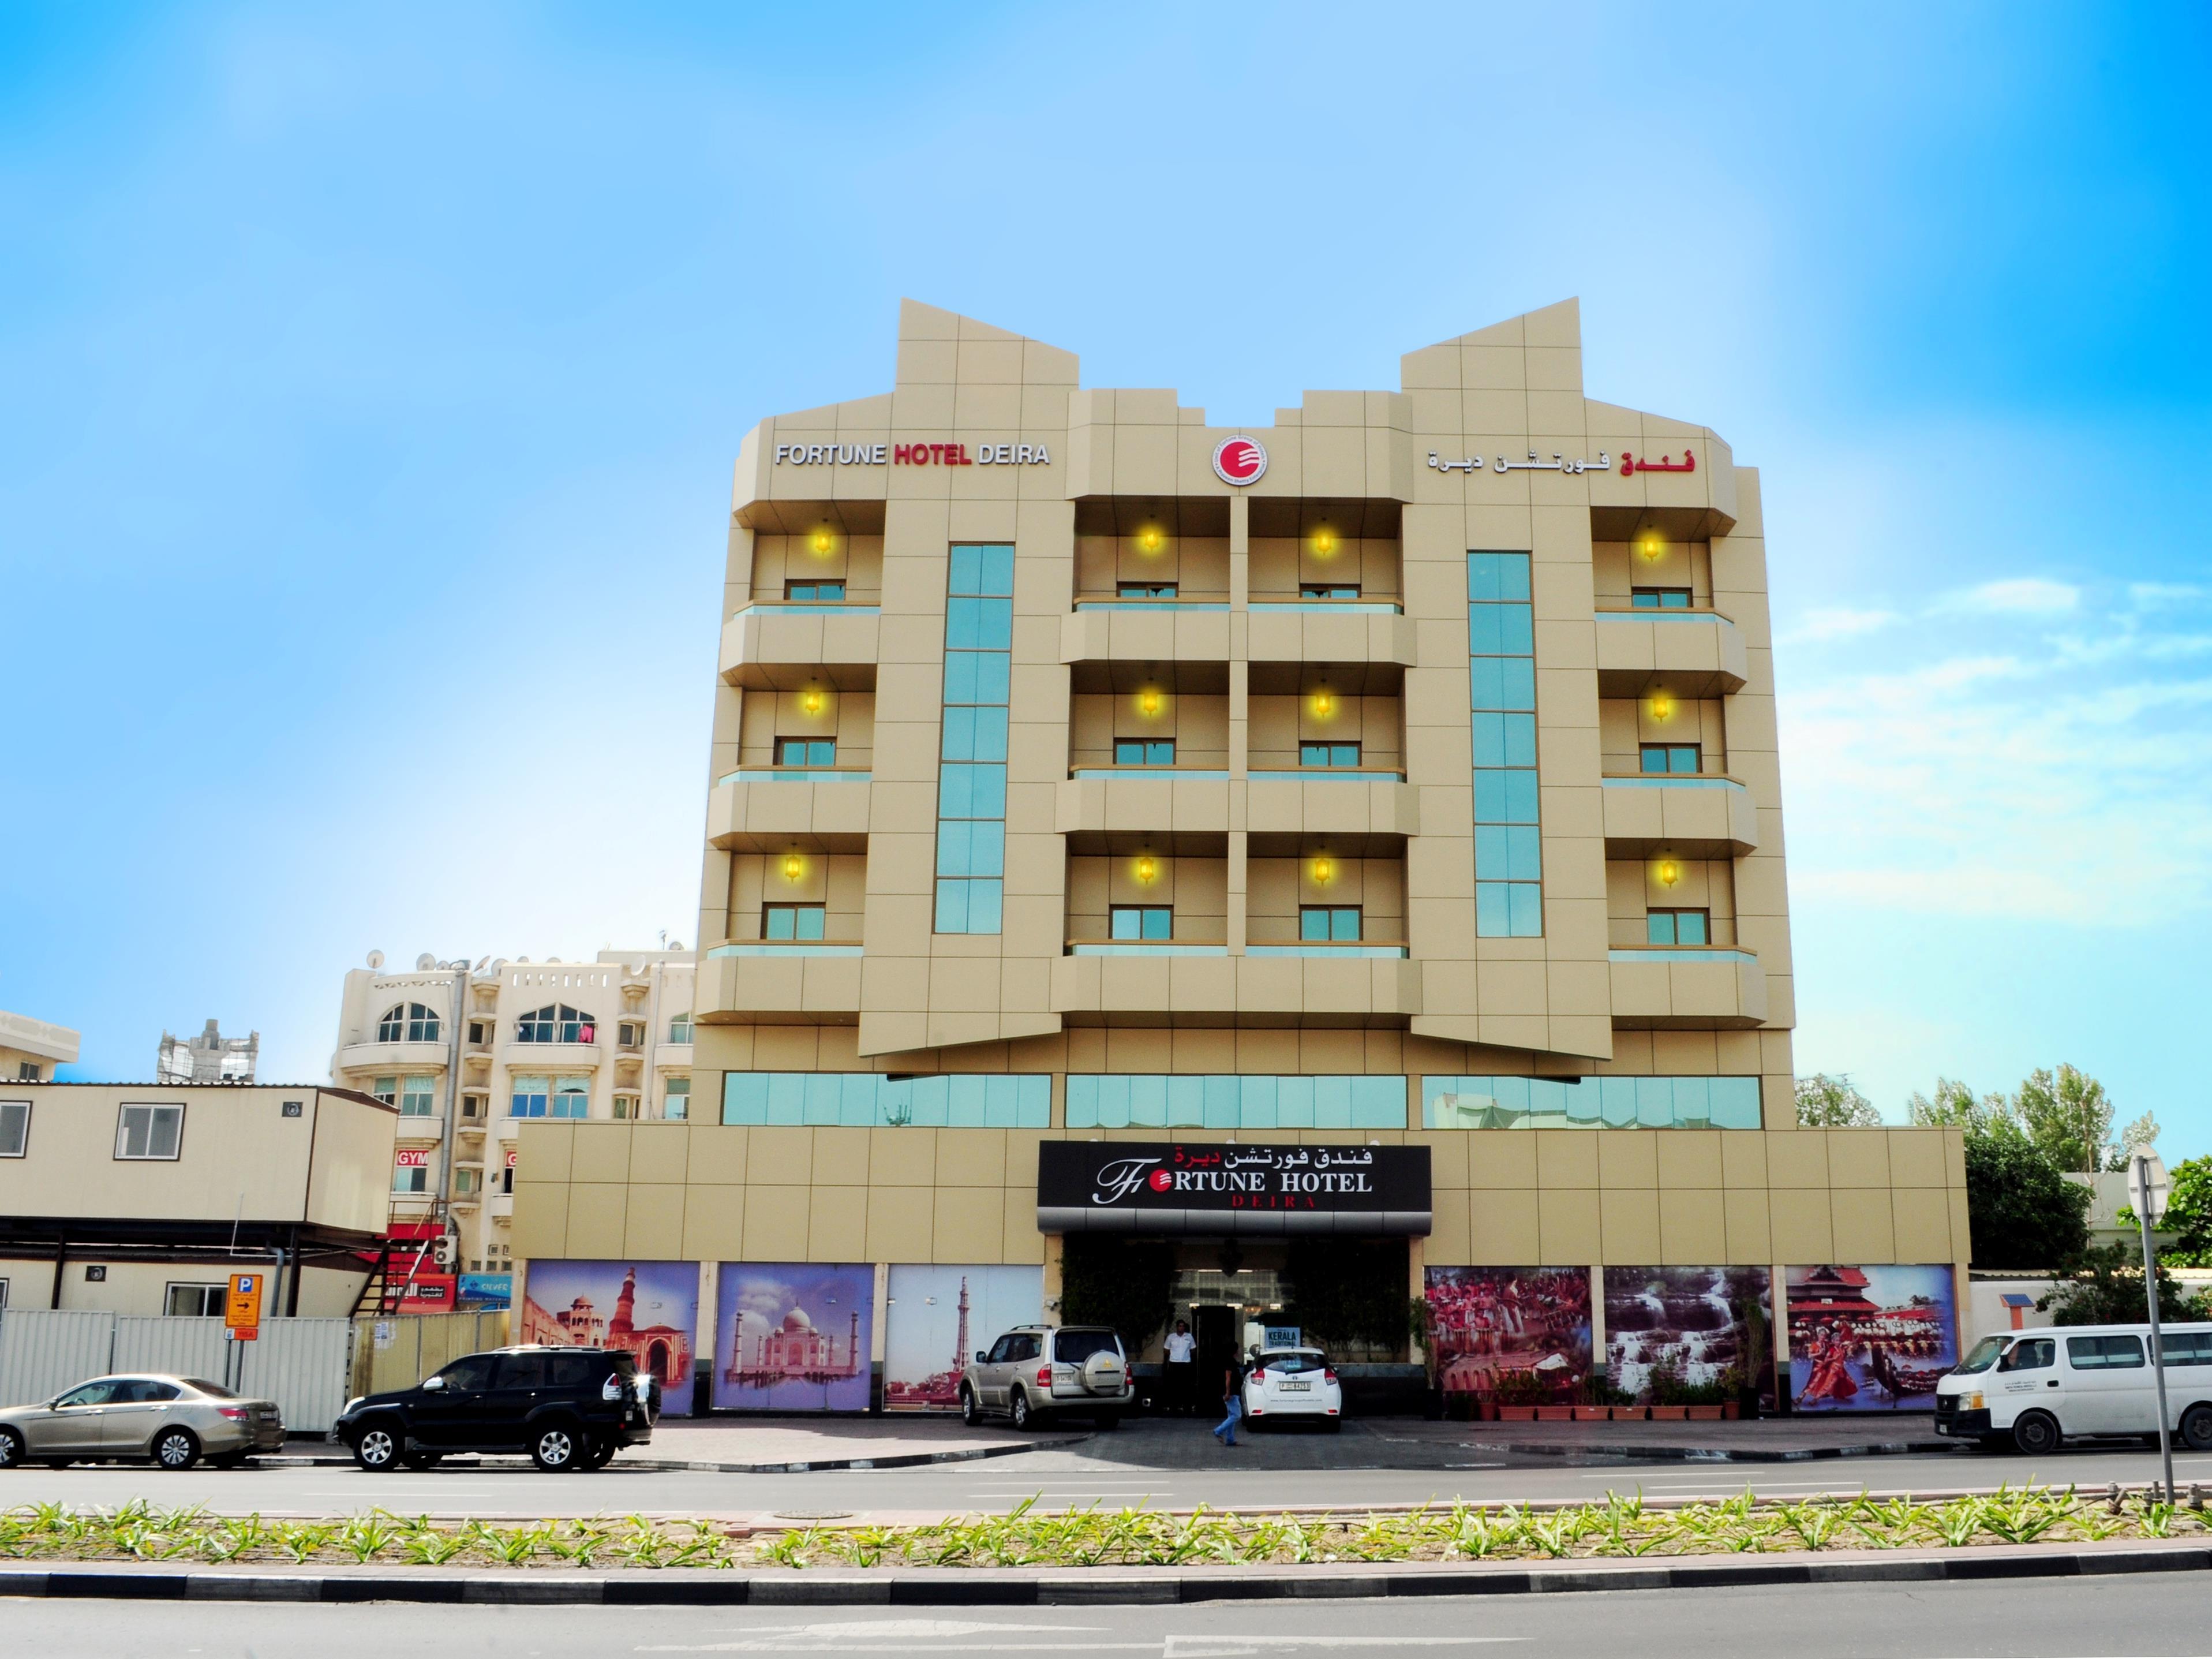 Fortune Hotel Deira Emirate of Dubai FAQ 2017, What facilities are there in Fortune Hotel Deira Emirate of Dubai 2017, What Languages Spoken are Supported in Fortune Hotel Deira Emirate of Dubai 2017, Which payment cards are accepted in Fortune Hotel Deira Emirate of Dubai , Emirate of Dubai Fortune Hotel Deira room facilities and services Q&A 2017, Emirate of Dubai Fortune Hotel Deira online booking services 2017, Emirate of Dubai Fortune Hotel Deira address 2017, Emirate of Dubai Fortune Hotel Deira telephone number 2017,Emirate of Dubai Fortune Hotel Deira map 2017, Emirate of Dubai Fortune Hotel Deira traffic guide 2017, how to go Emirate of Dubai Fortune Hotel Deira, Emirate of Dubai Fortune Hotel Deira booking online 2017, Emirate of Dubai Fortune Hotel Deira room types 2017.